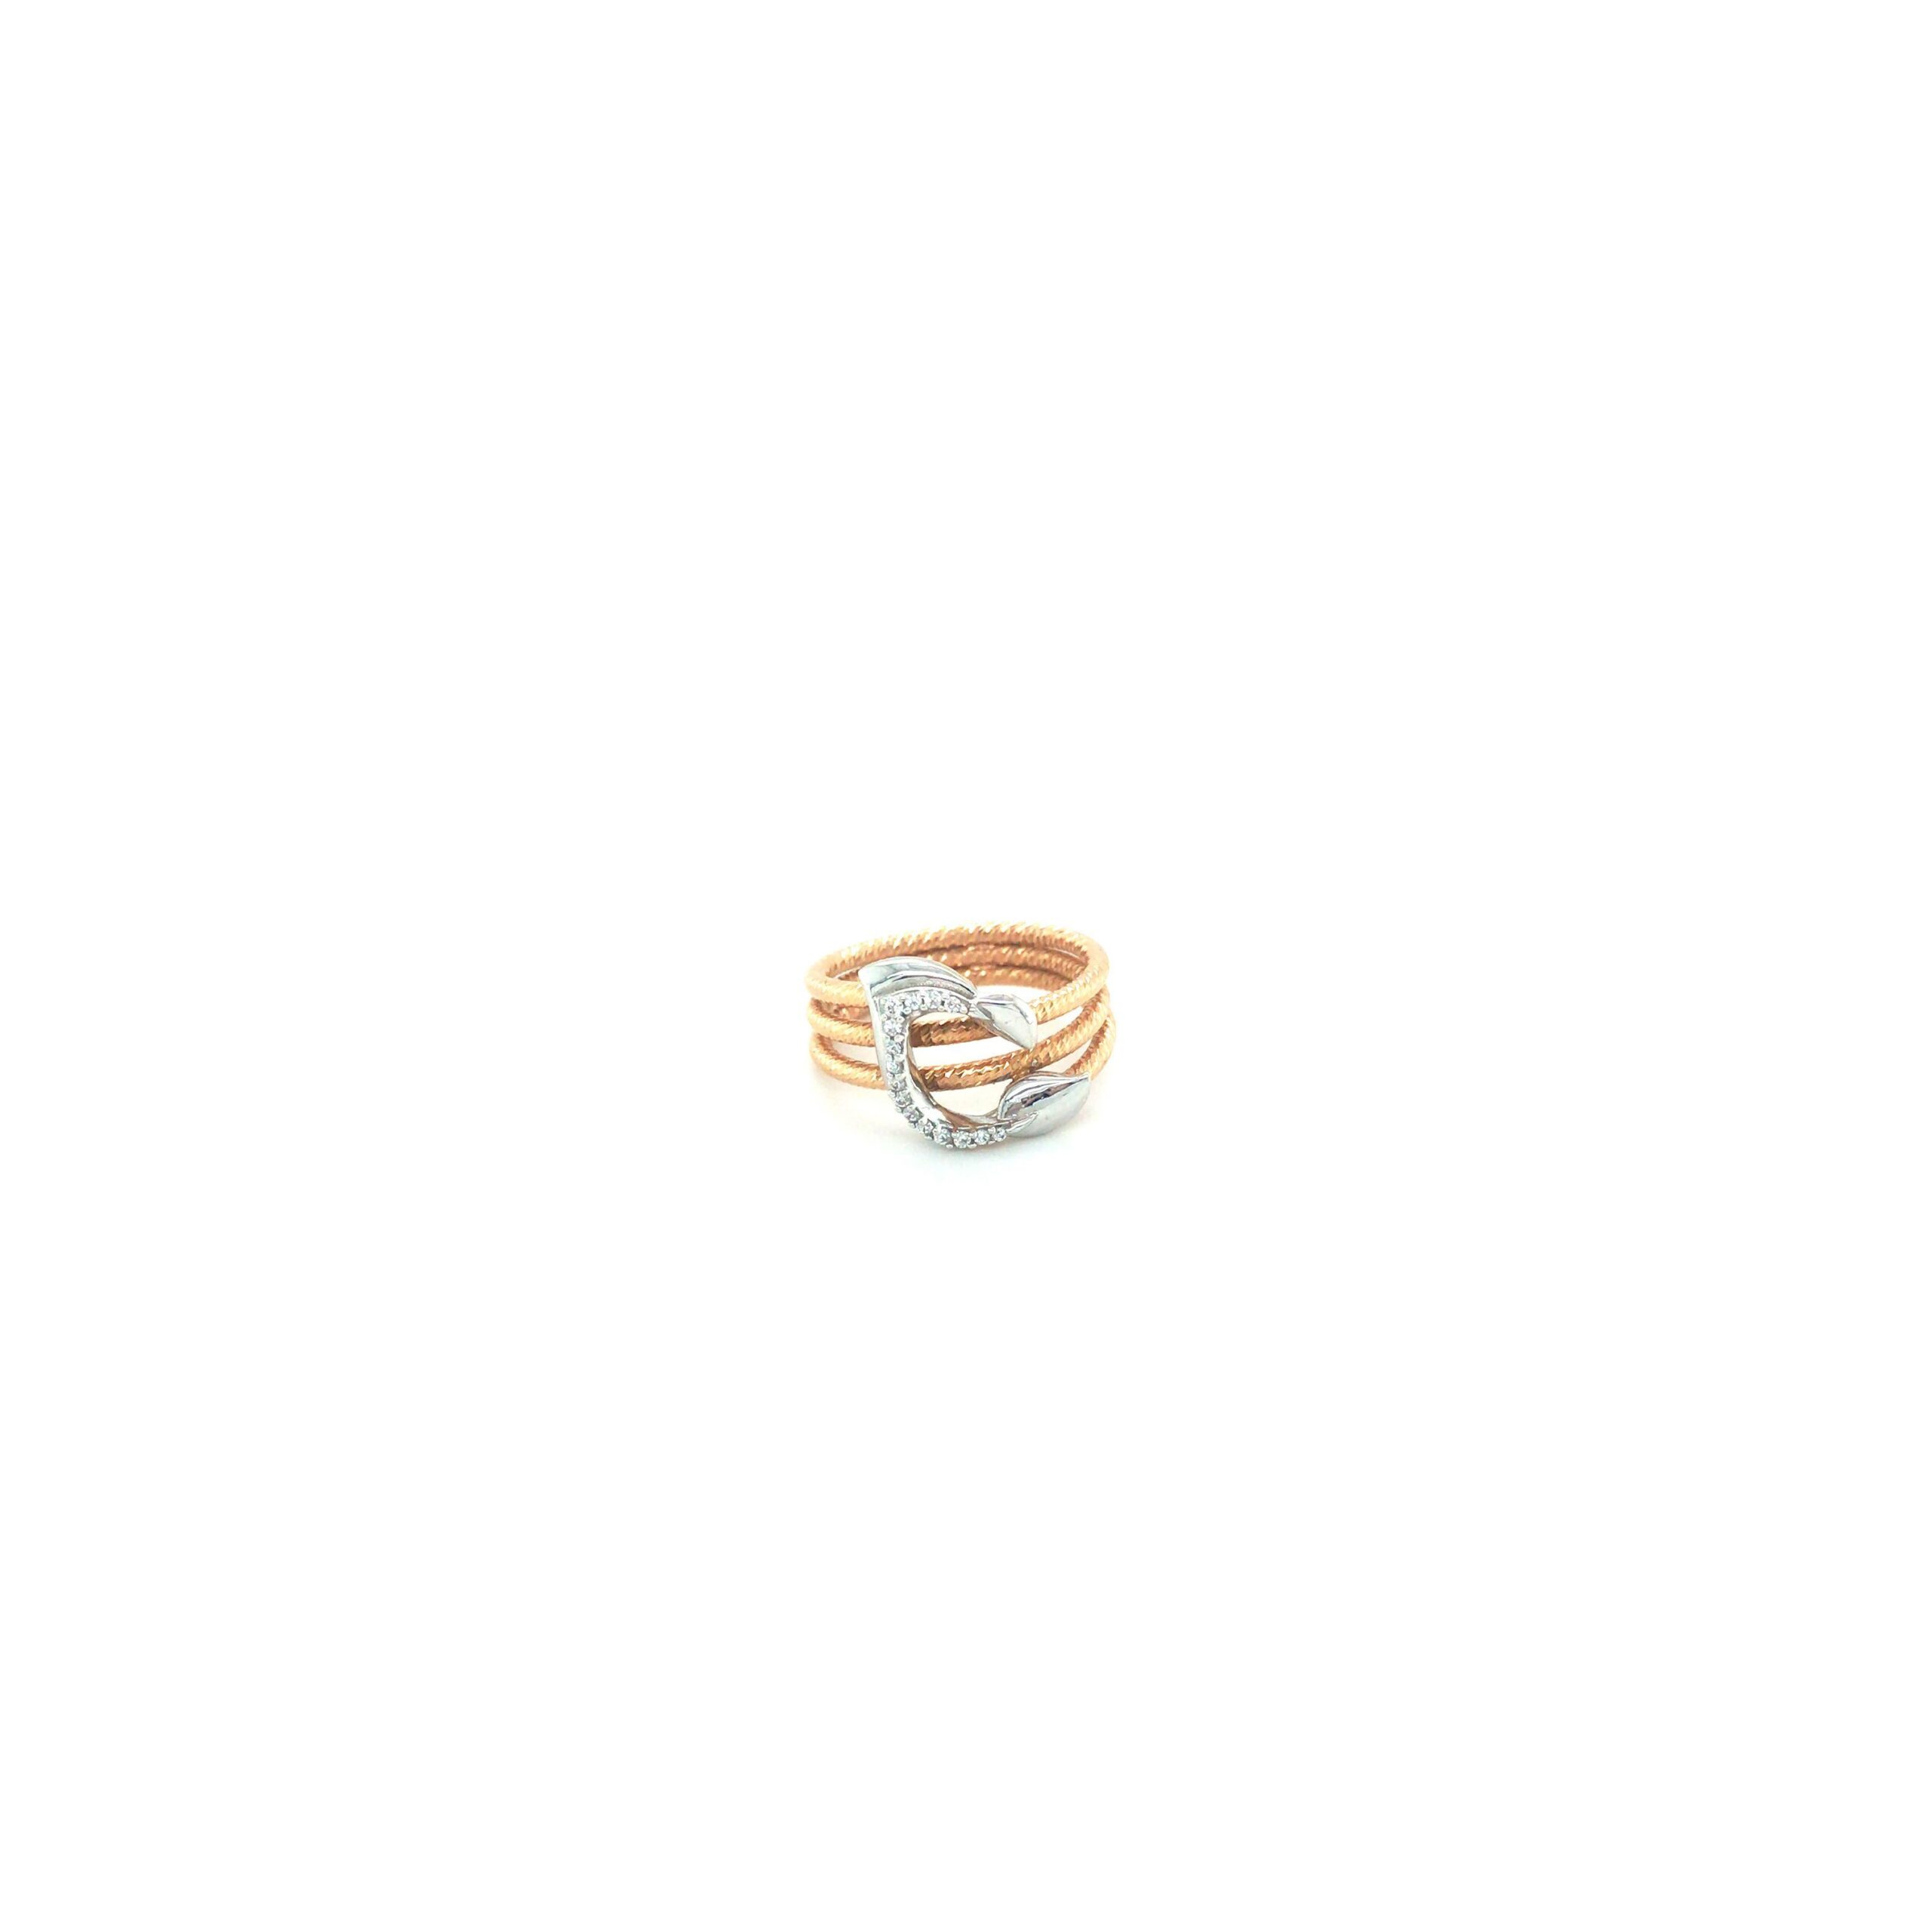 Tri-color 14k Italian Gold band Ring - Free shipping - Ruby Lane